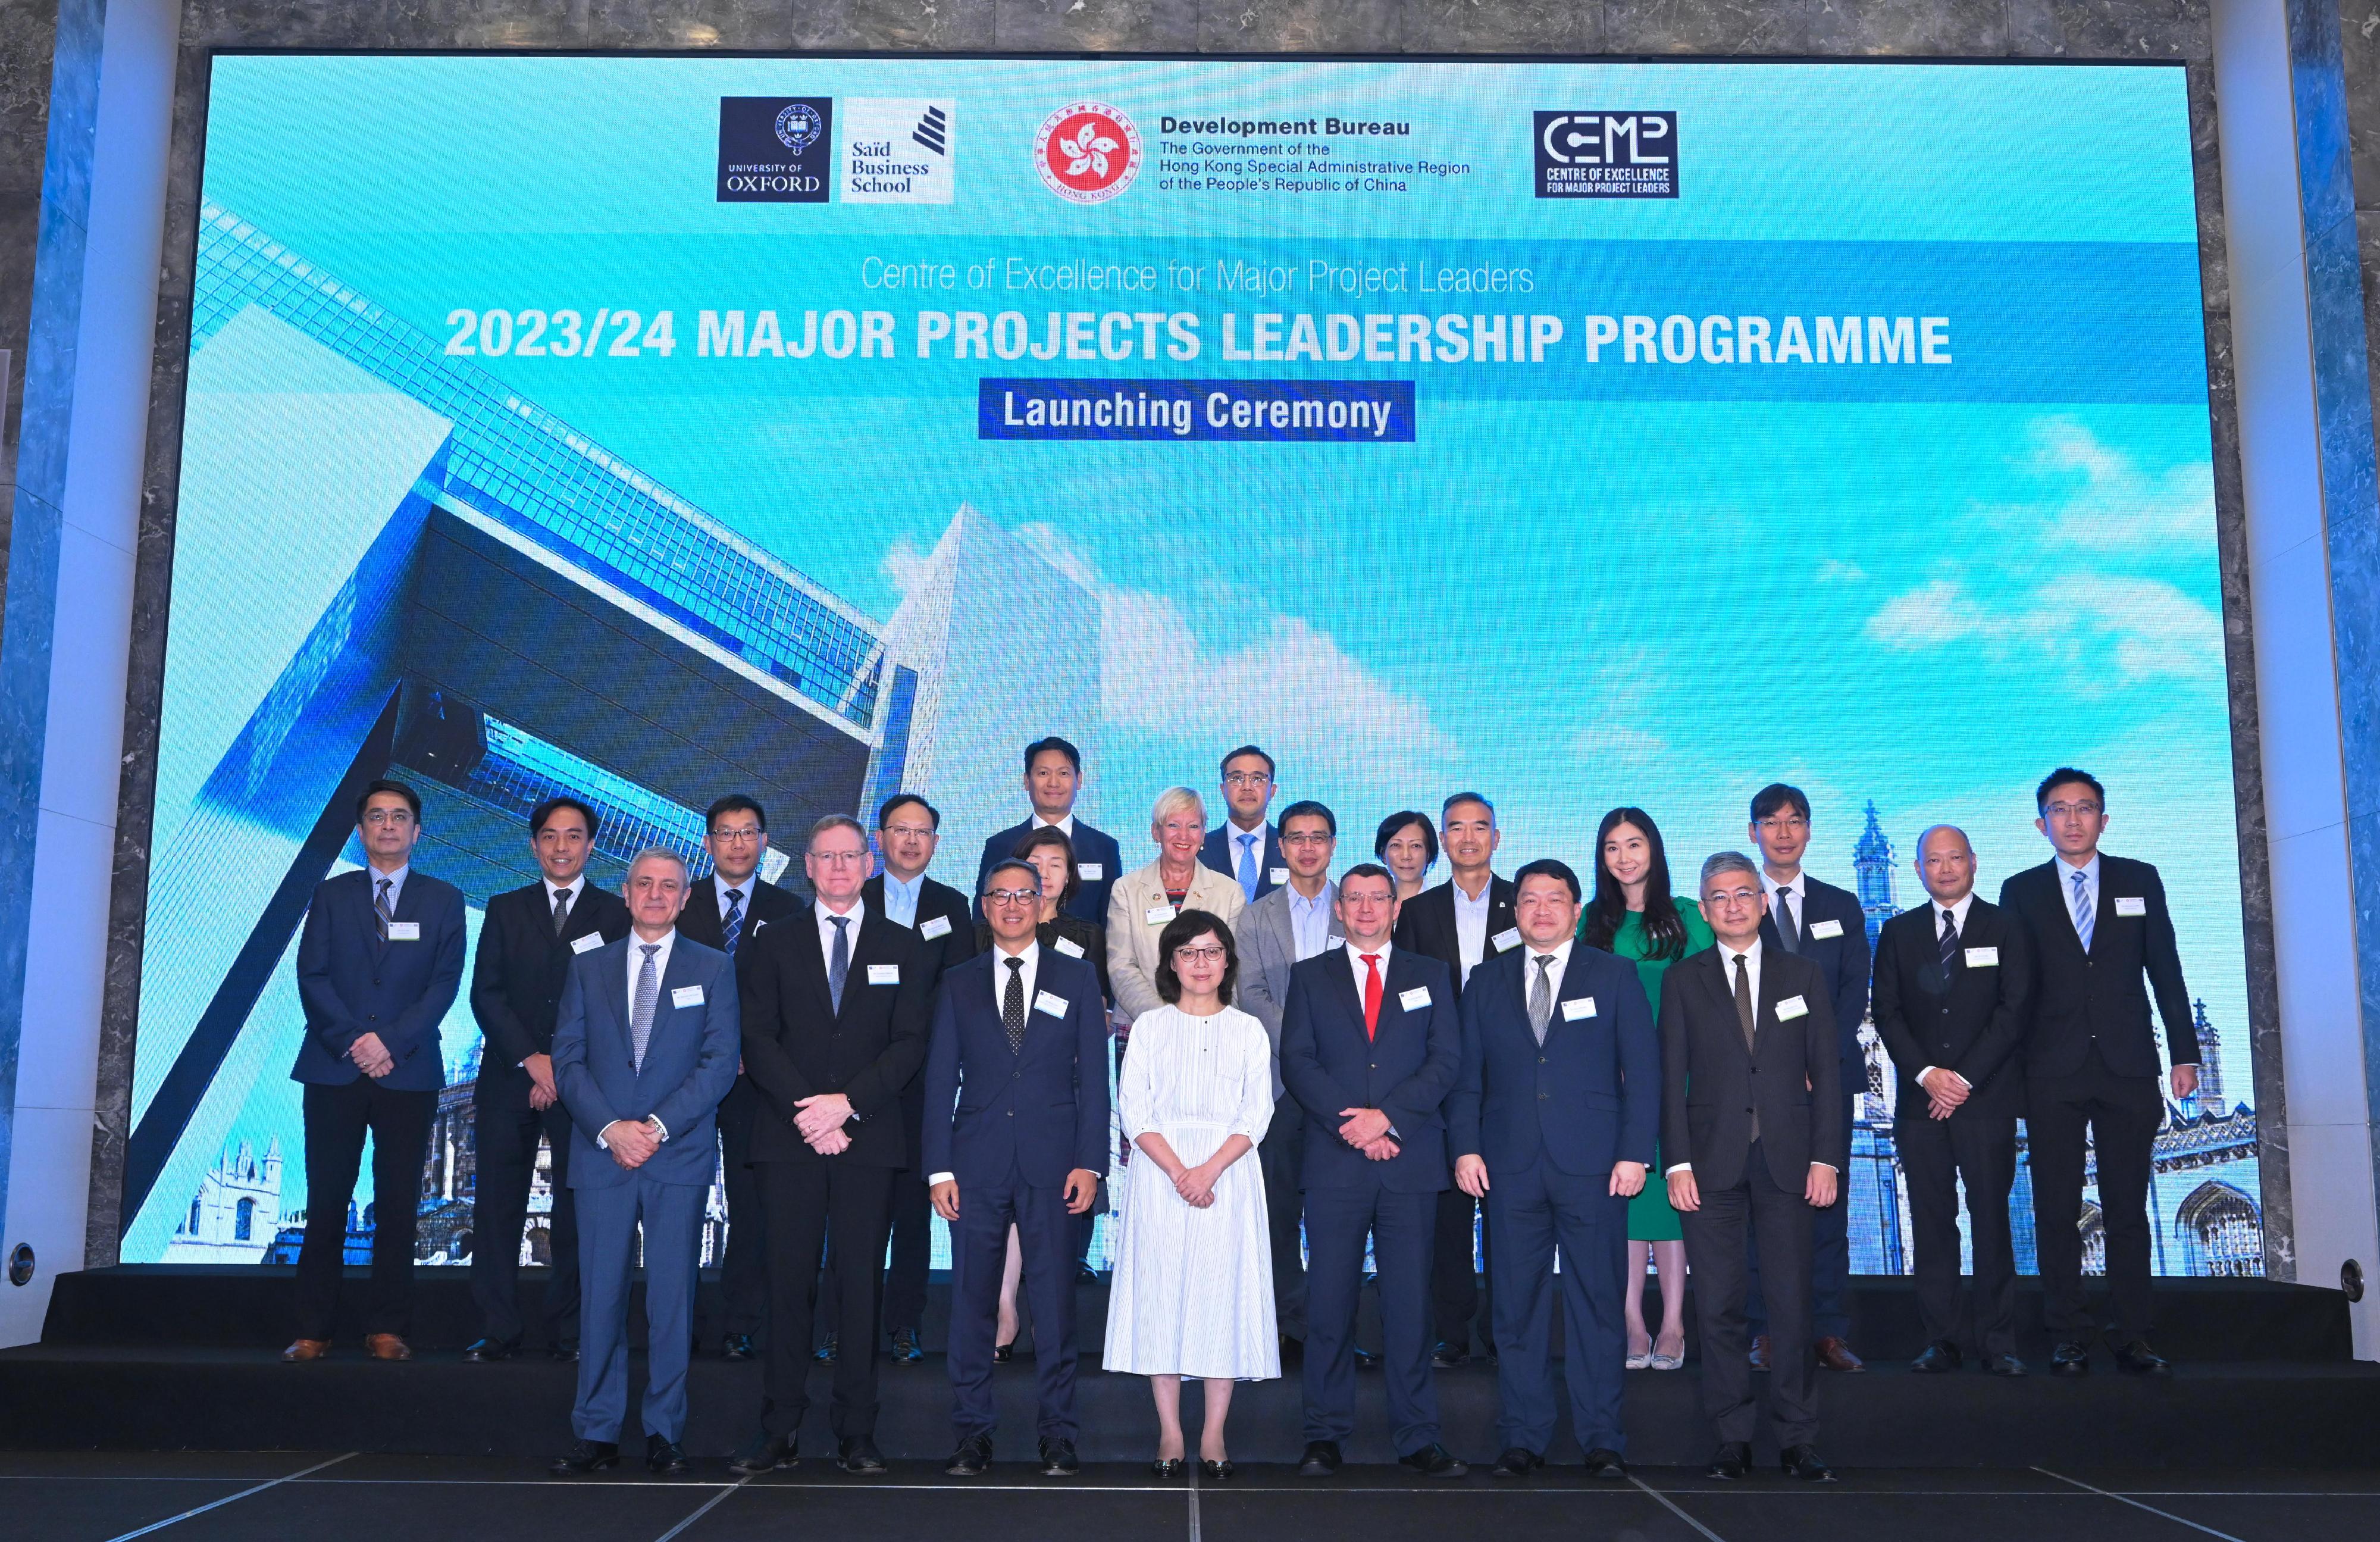 The Centre of Excellence for Major Project Leaders (CoE) under the Development Bureau launched today (August 28) the 2023/24 Major Projects Leadership Programme. Photo shows the Secretary for Development and Chairman of the CoE, Ms Bernadette Linn (first row, centre); and the Permanent Secretary for Development (Works) and Superintendent of the CoE, Mr Ricky Lau (first row, third left), with other guests and cohort members at the launching ceremony.